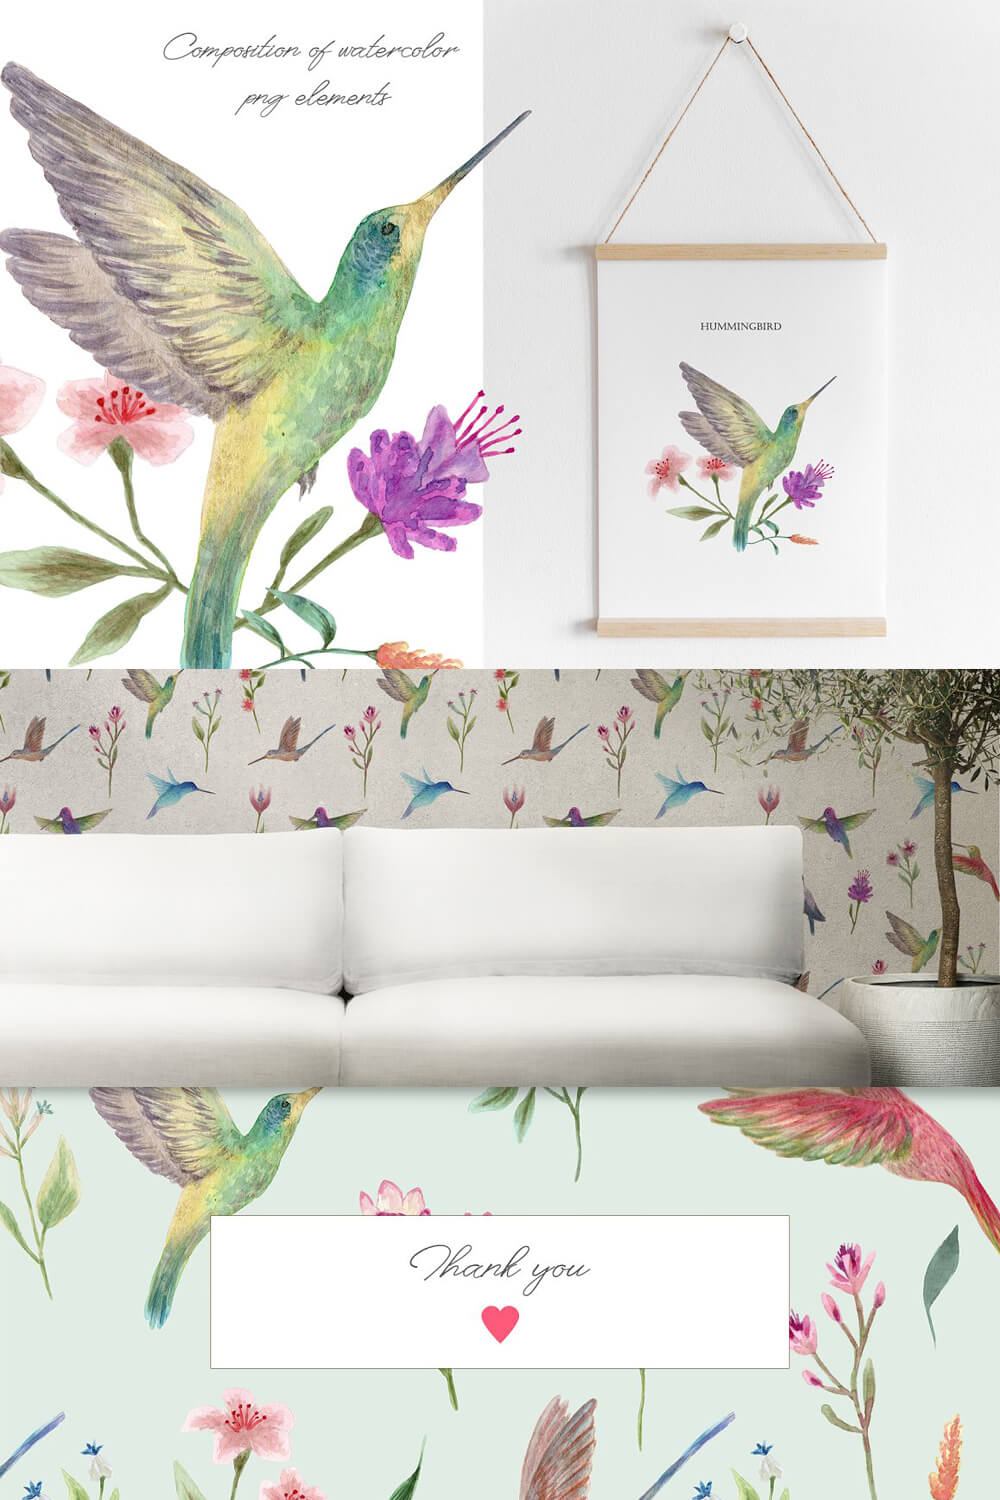 Various applications on objects painted with watercolor hummingbirds: on the wallpaper, on the picture, on the background.